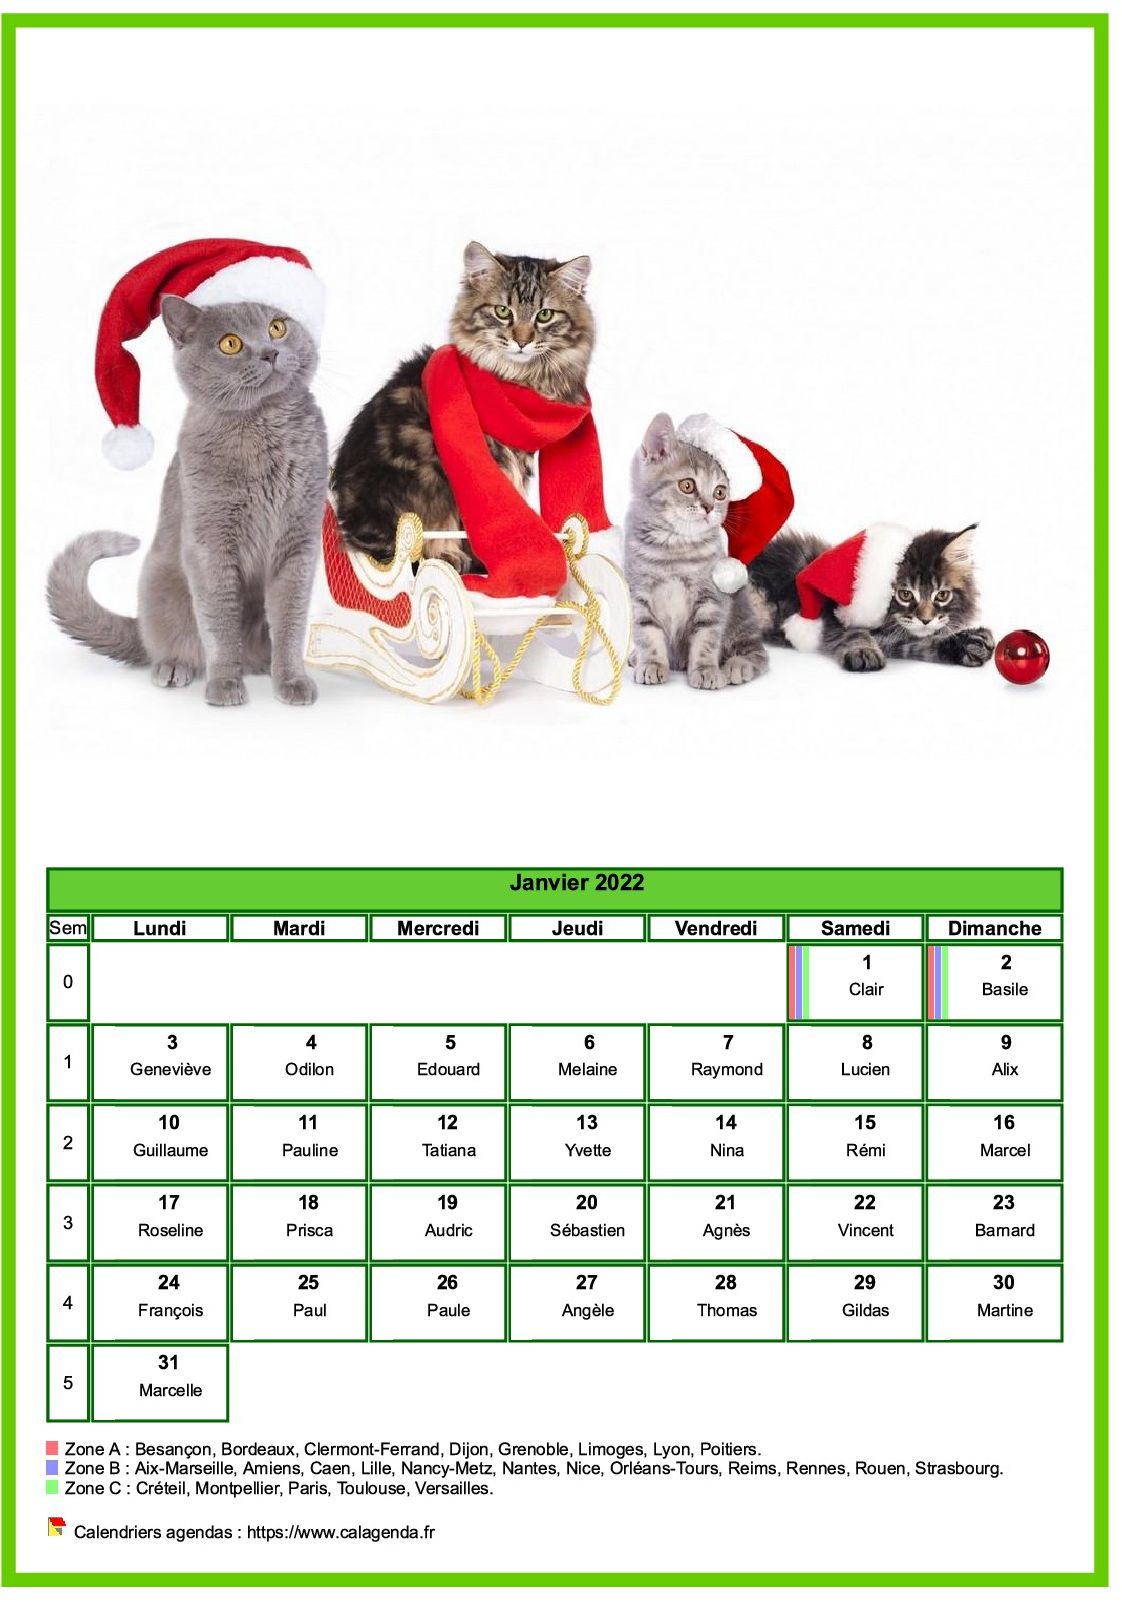 Calendrier janvier 2022 chats